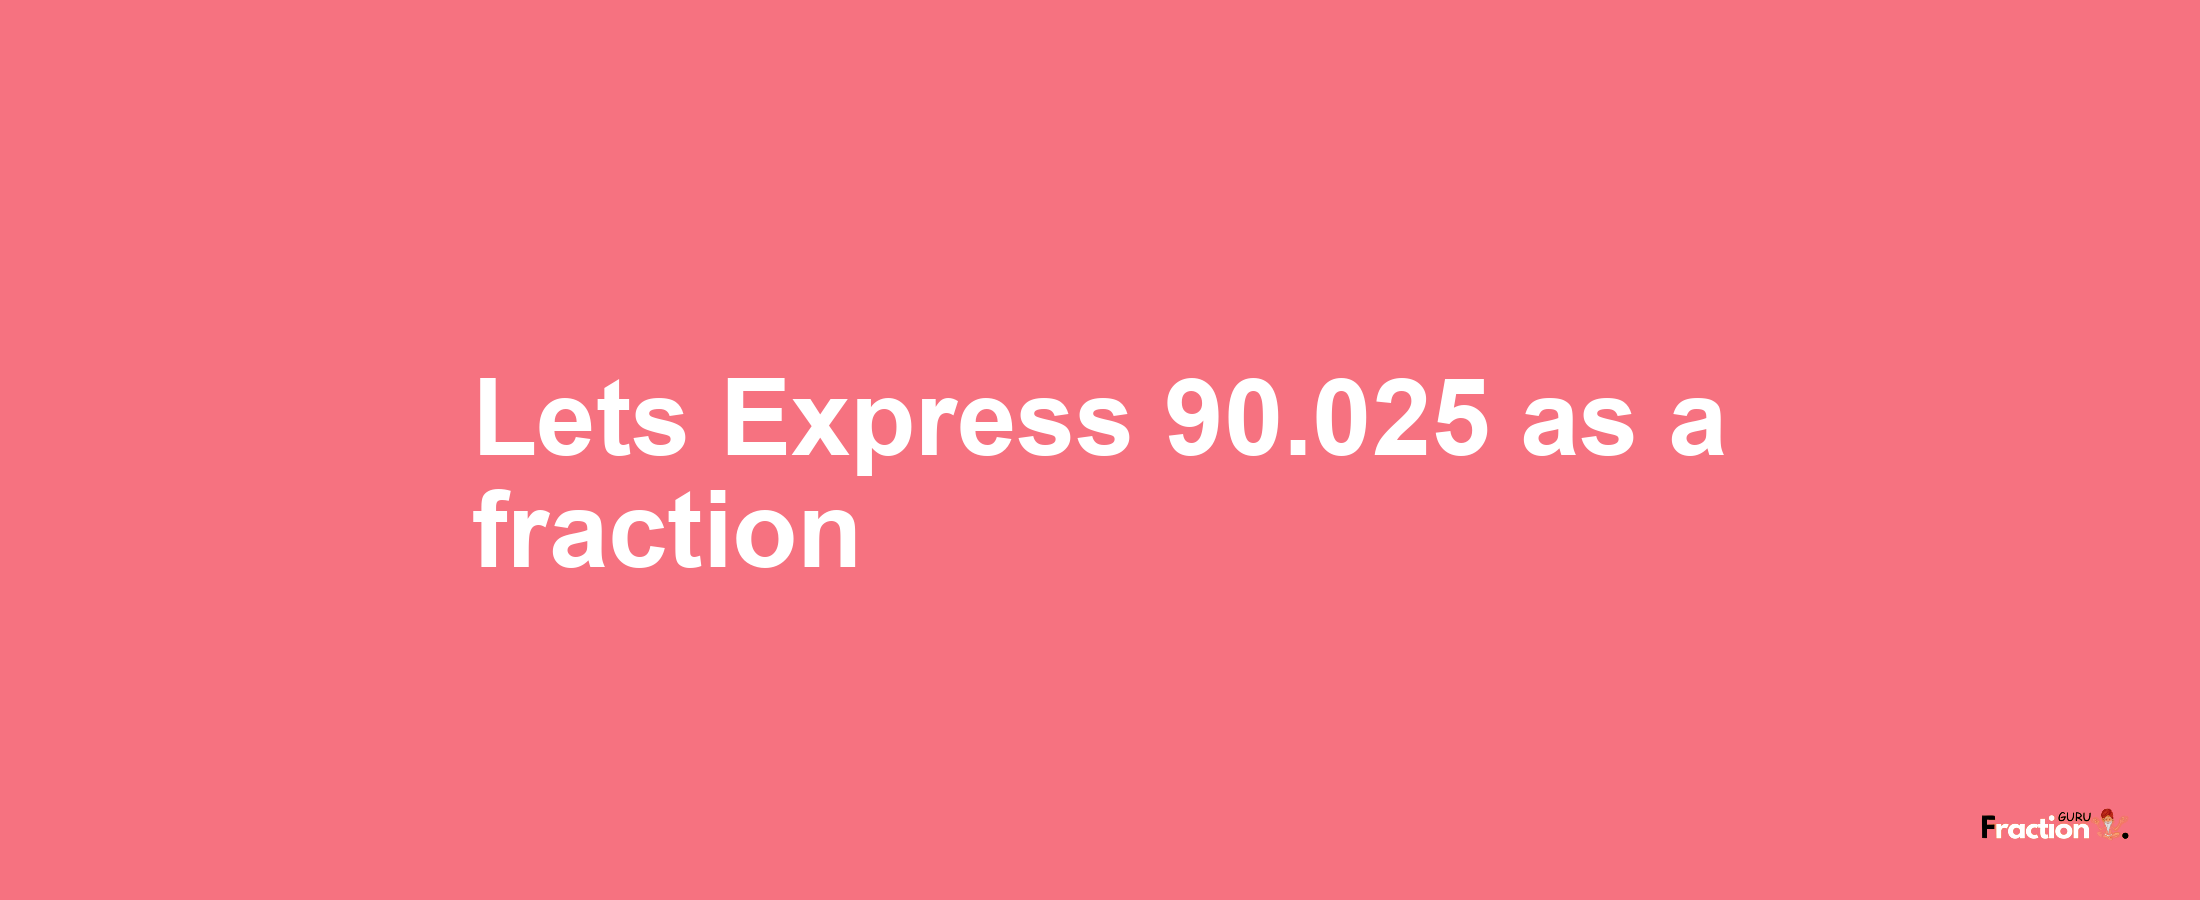 Lets Express 90.025 as afraction